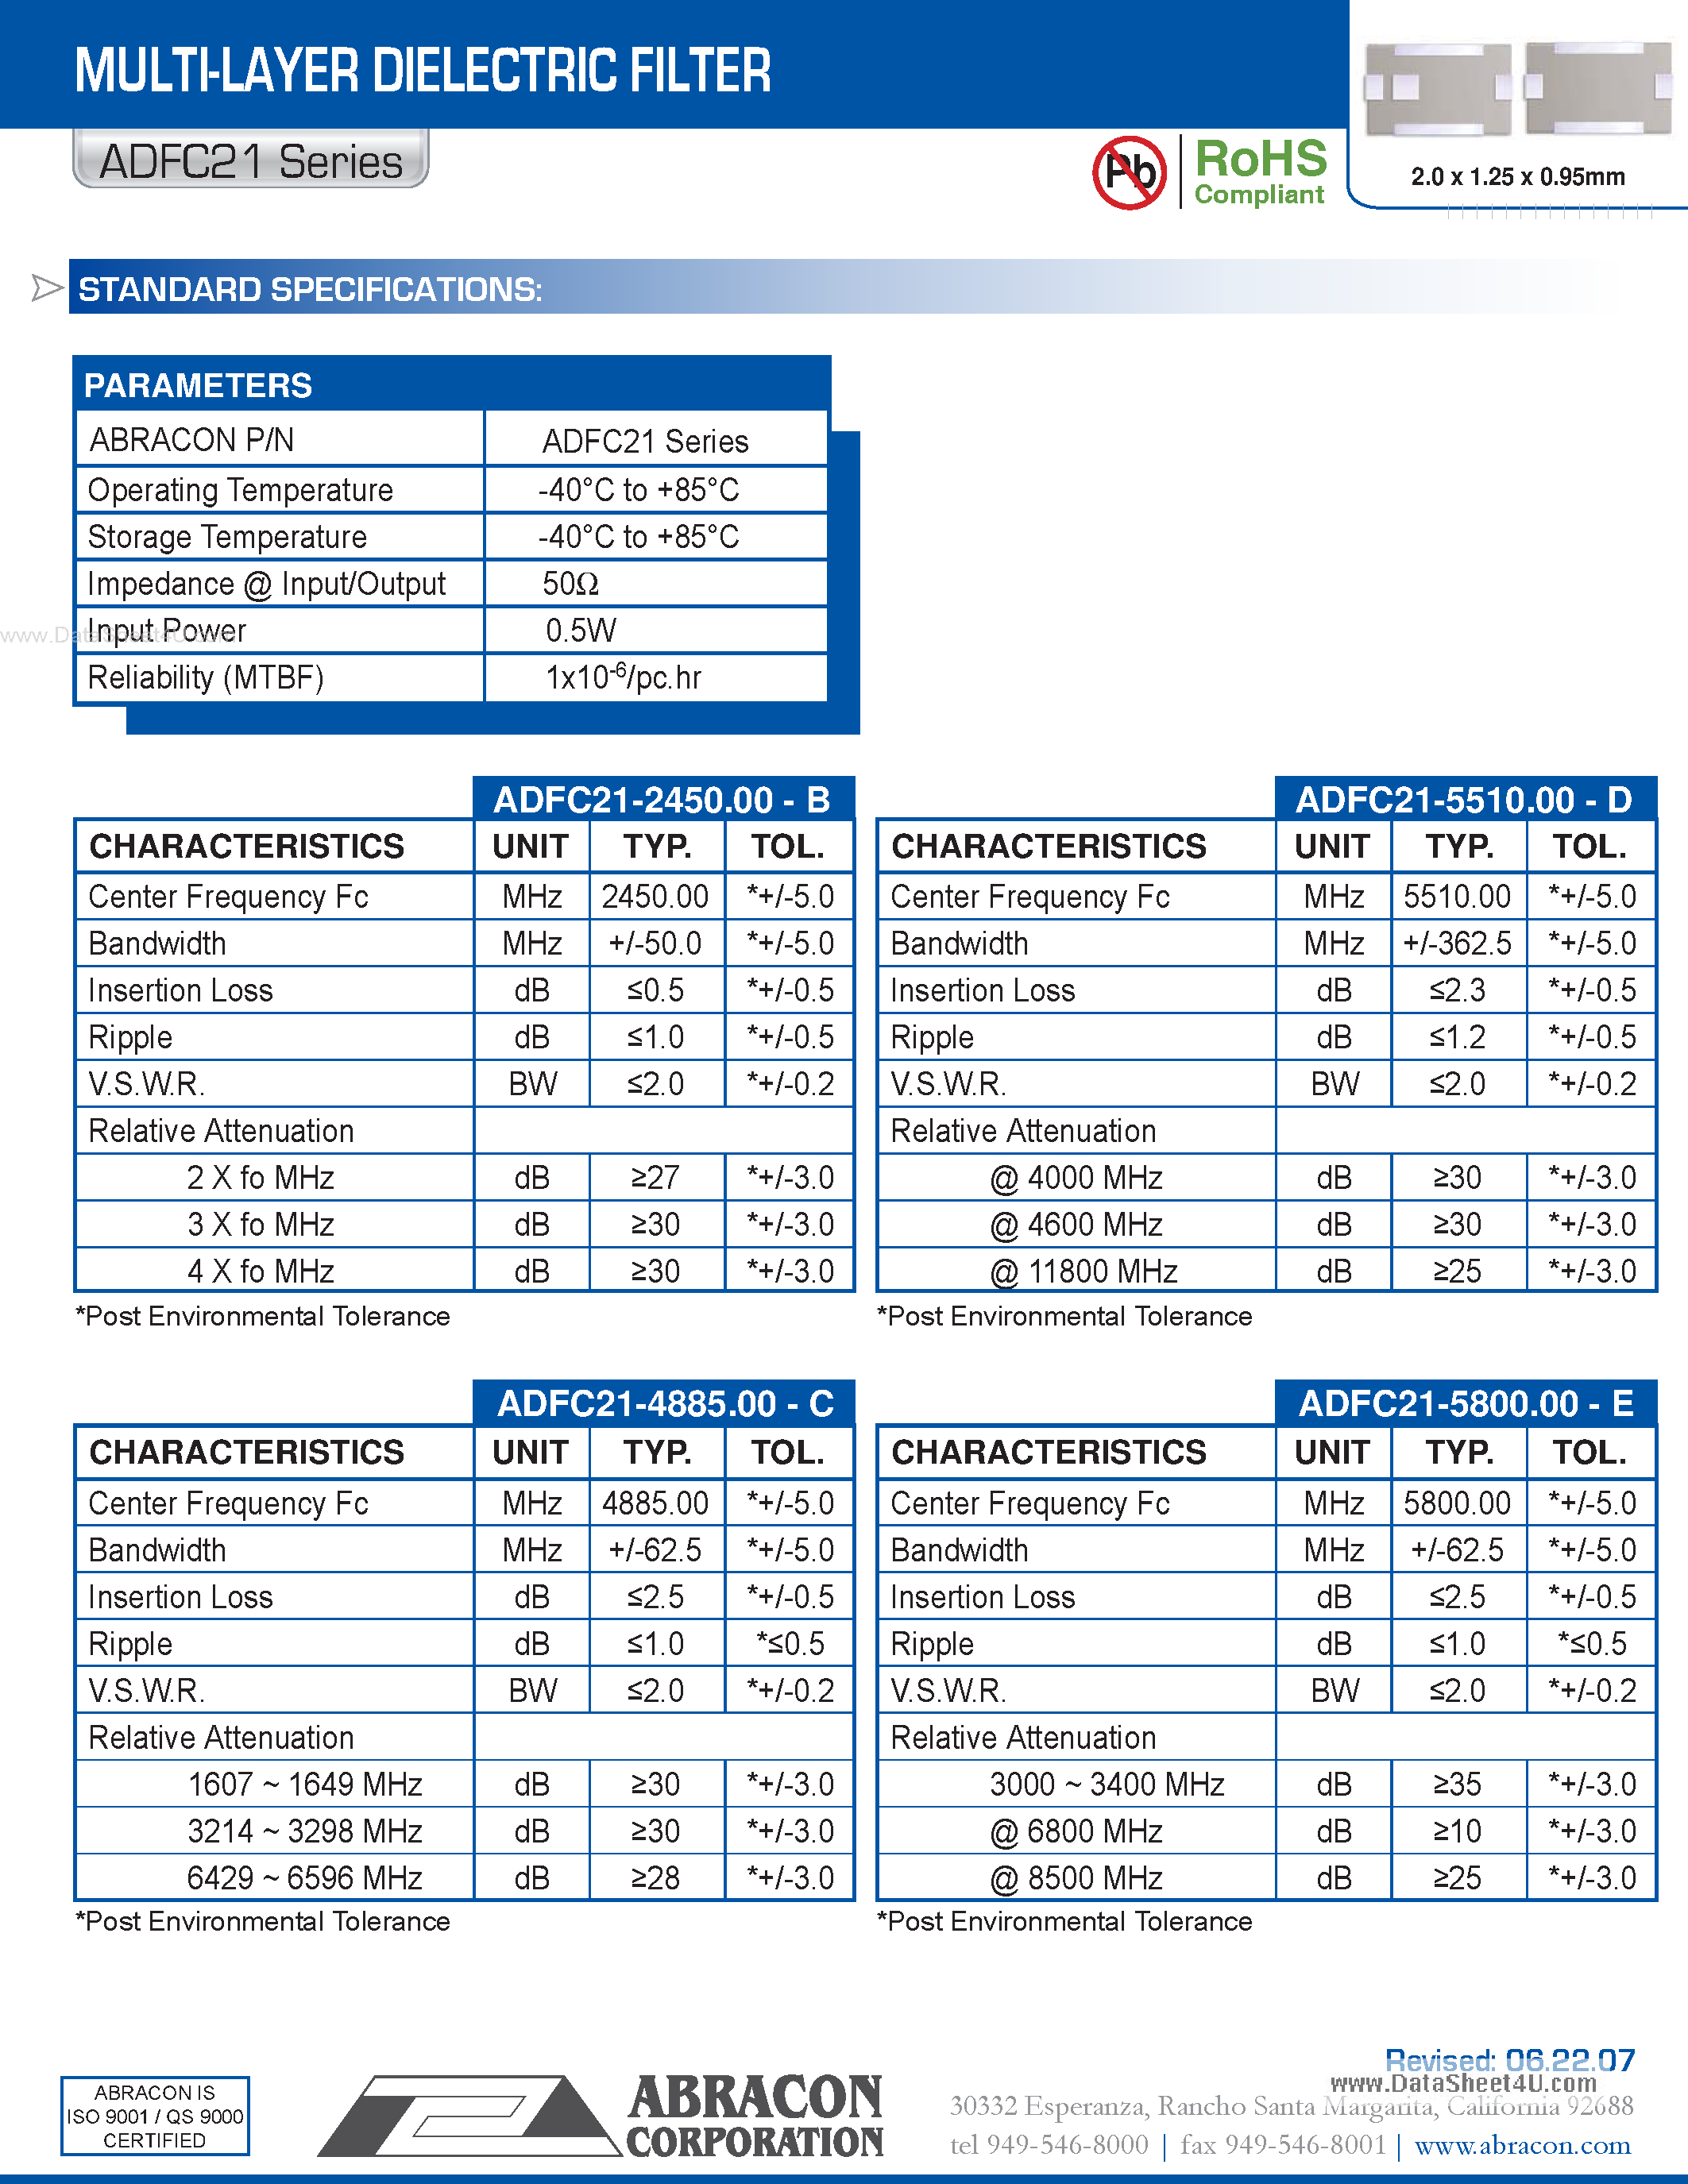 Datasheet ADFC21 - MULTI-LAYER DIELECTRIC FILTER page 1